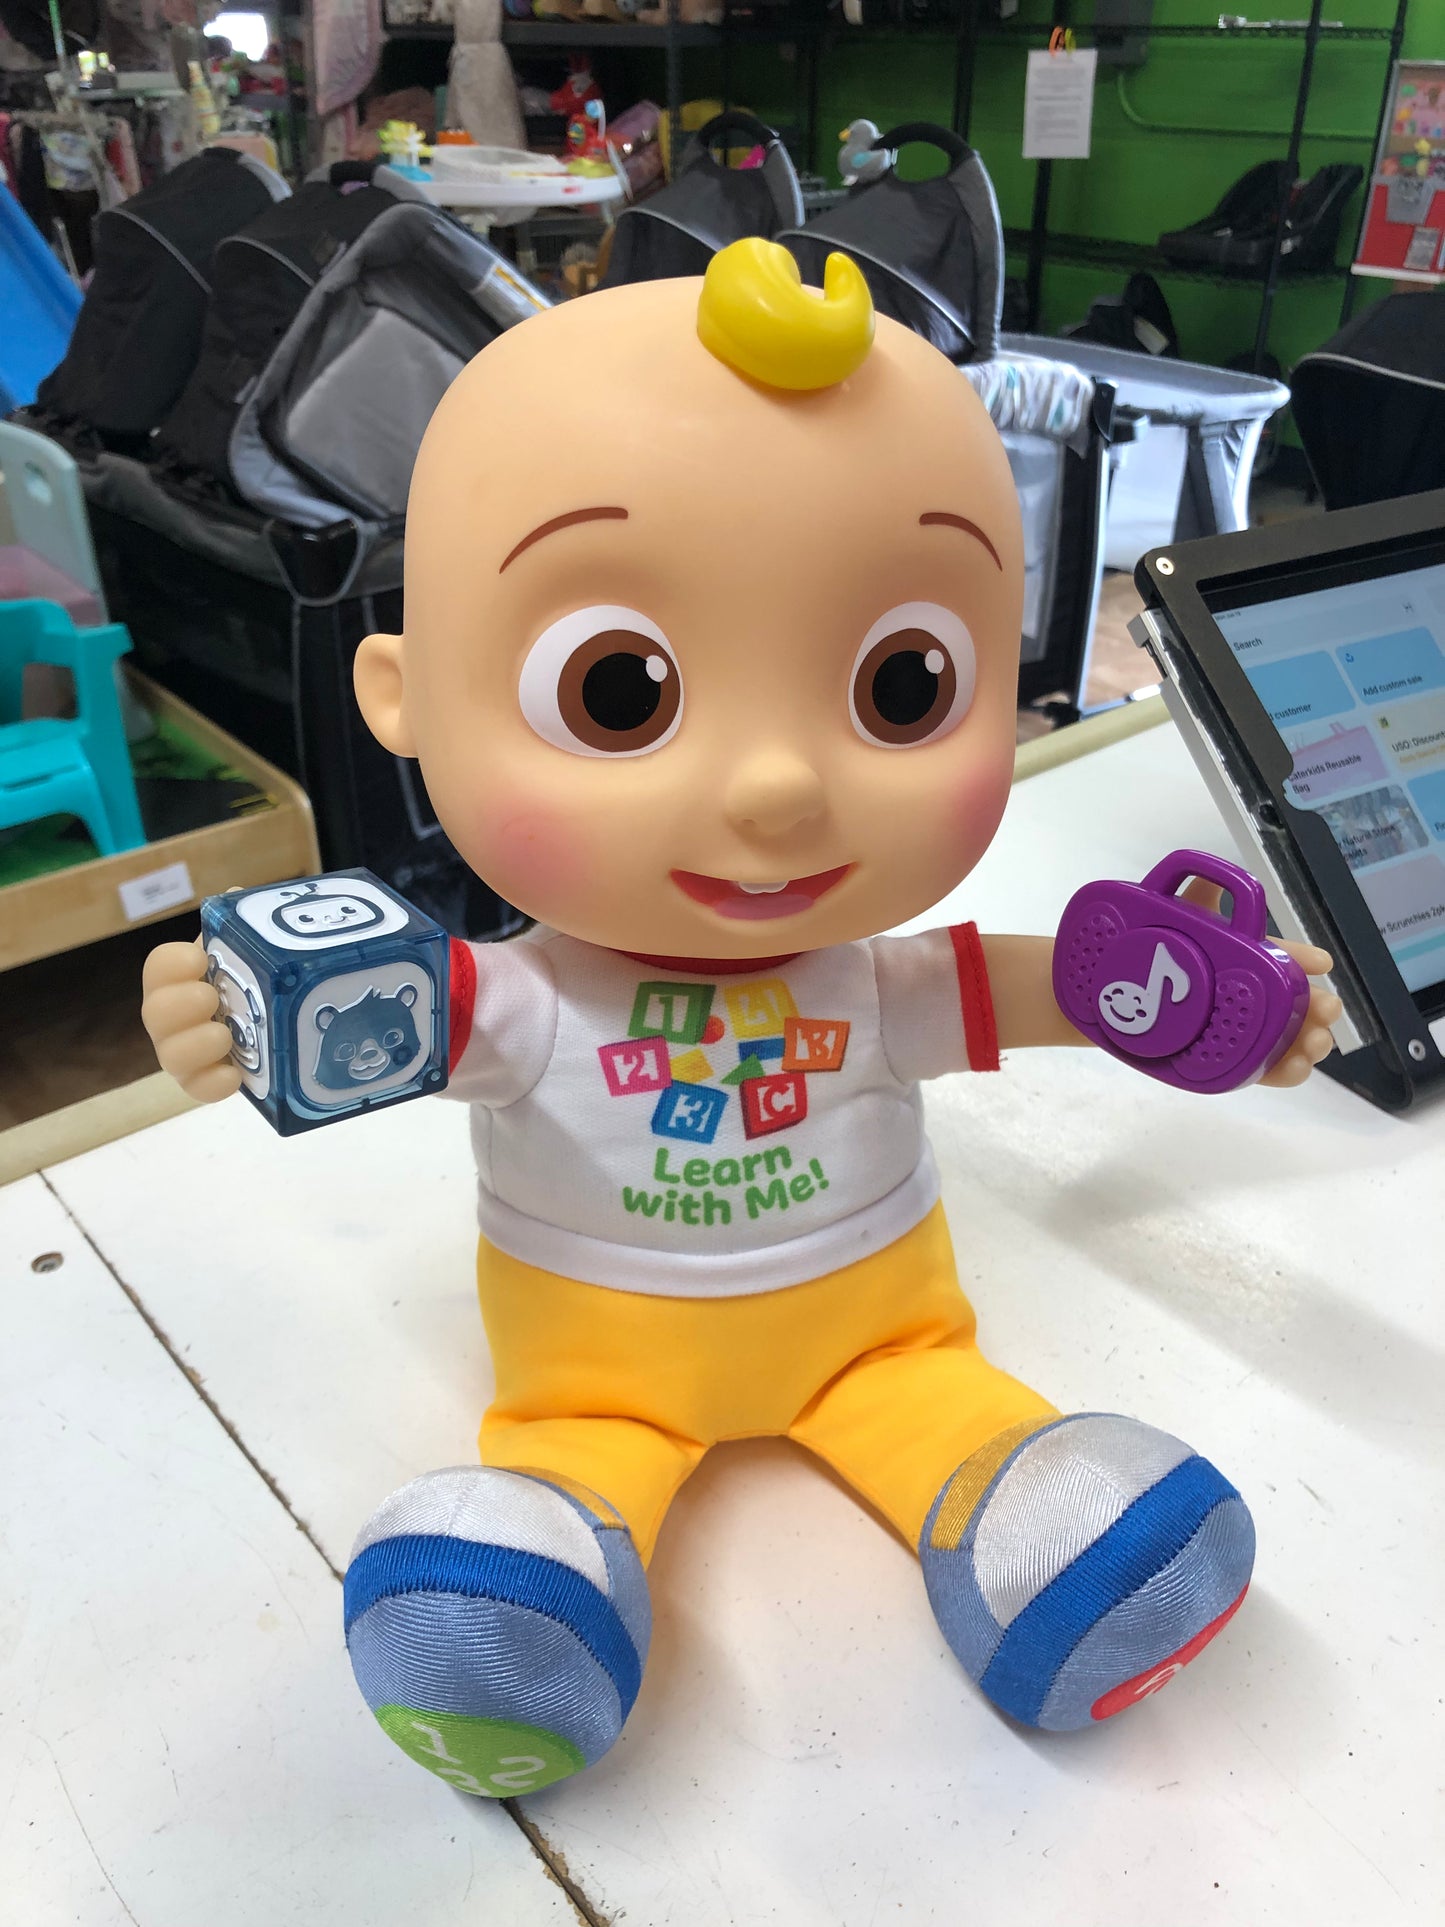 Cocomelon Learning Doll